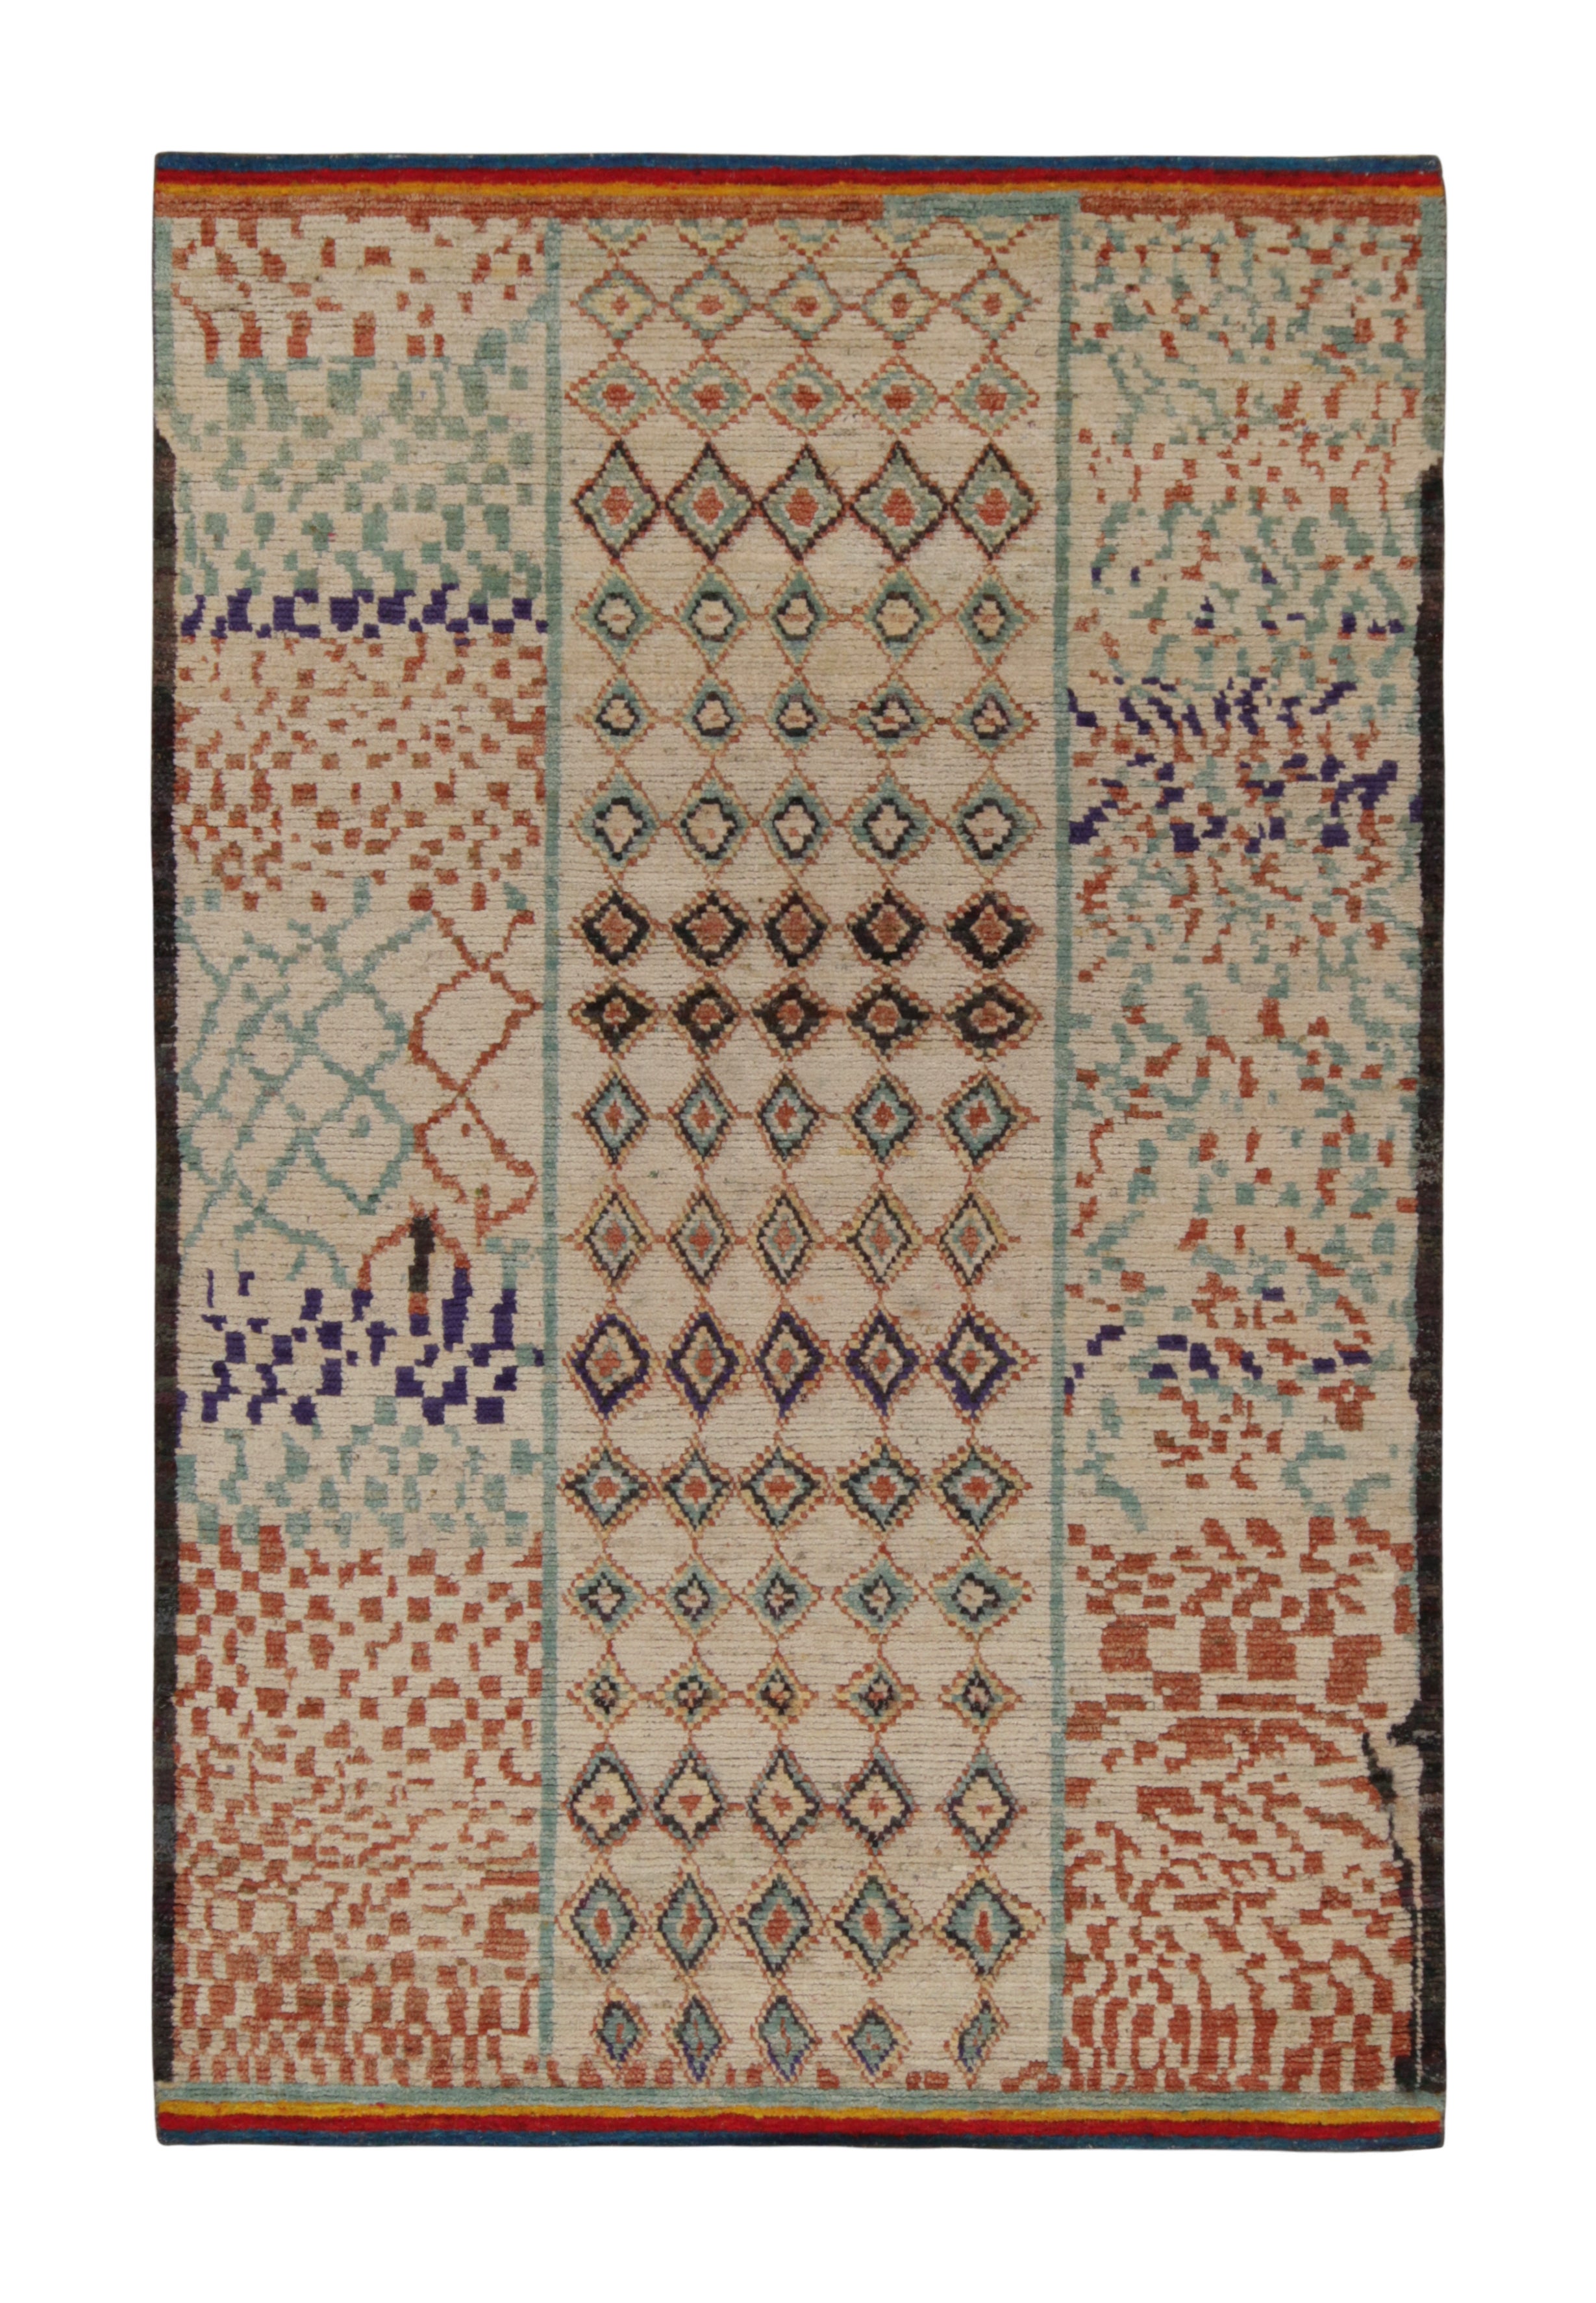 Rug & Kilim’s Moroccan Style Rug in Beige, Red and Blue Geometric Patterns For Sale